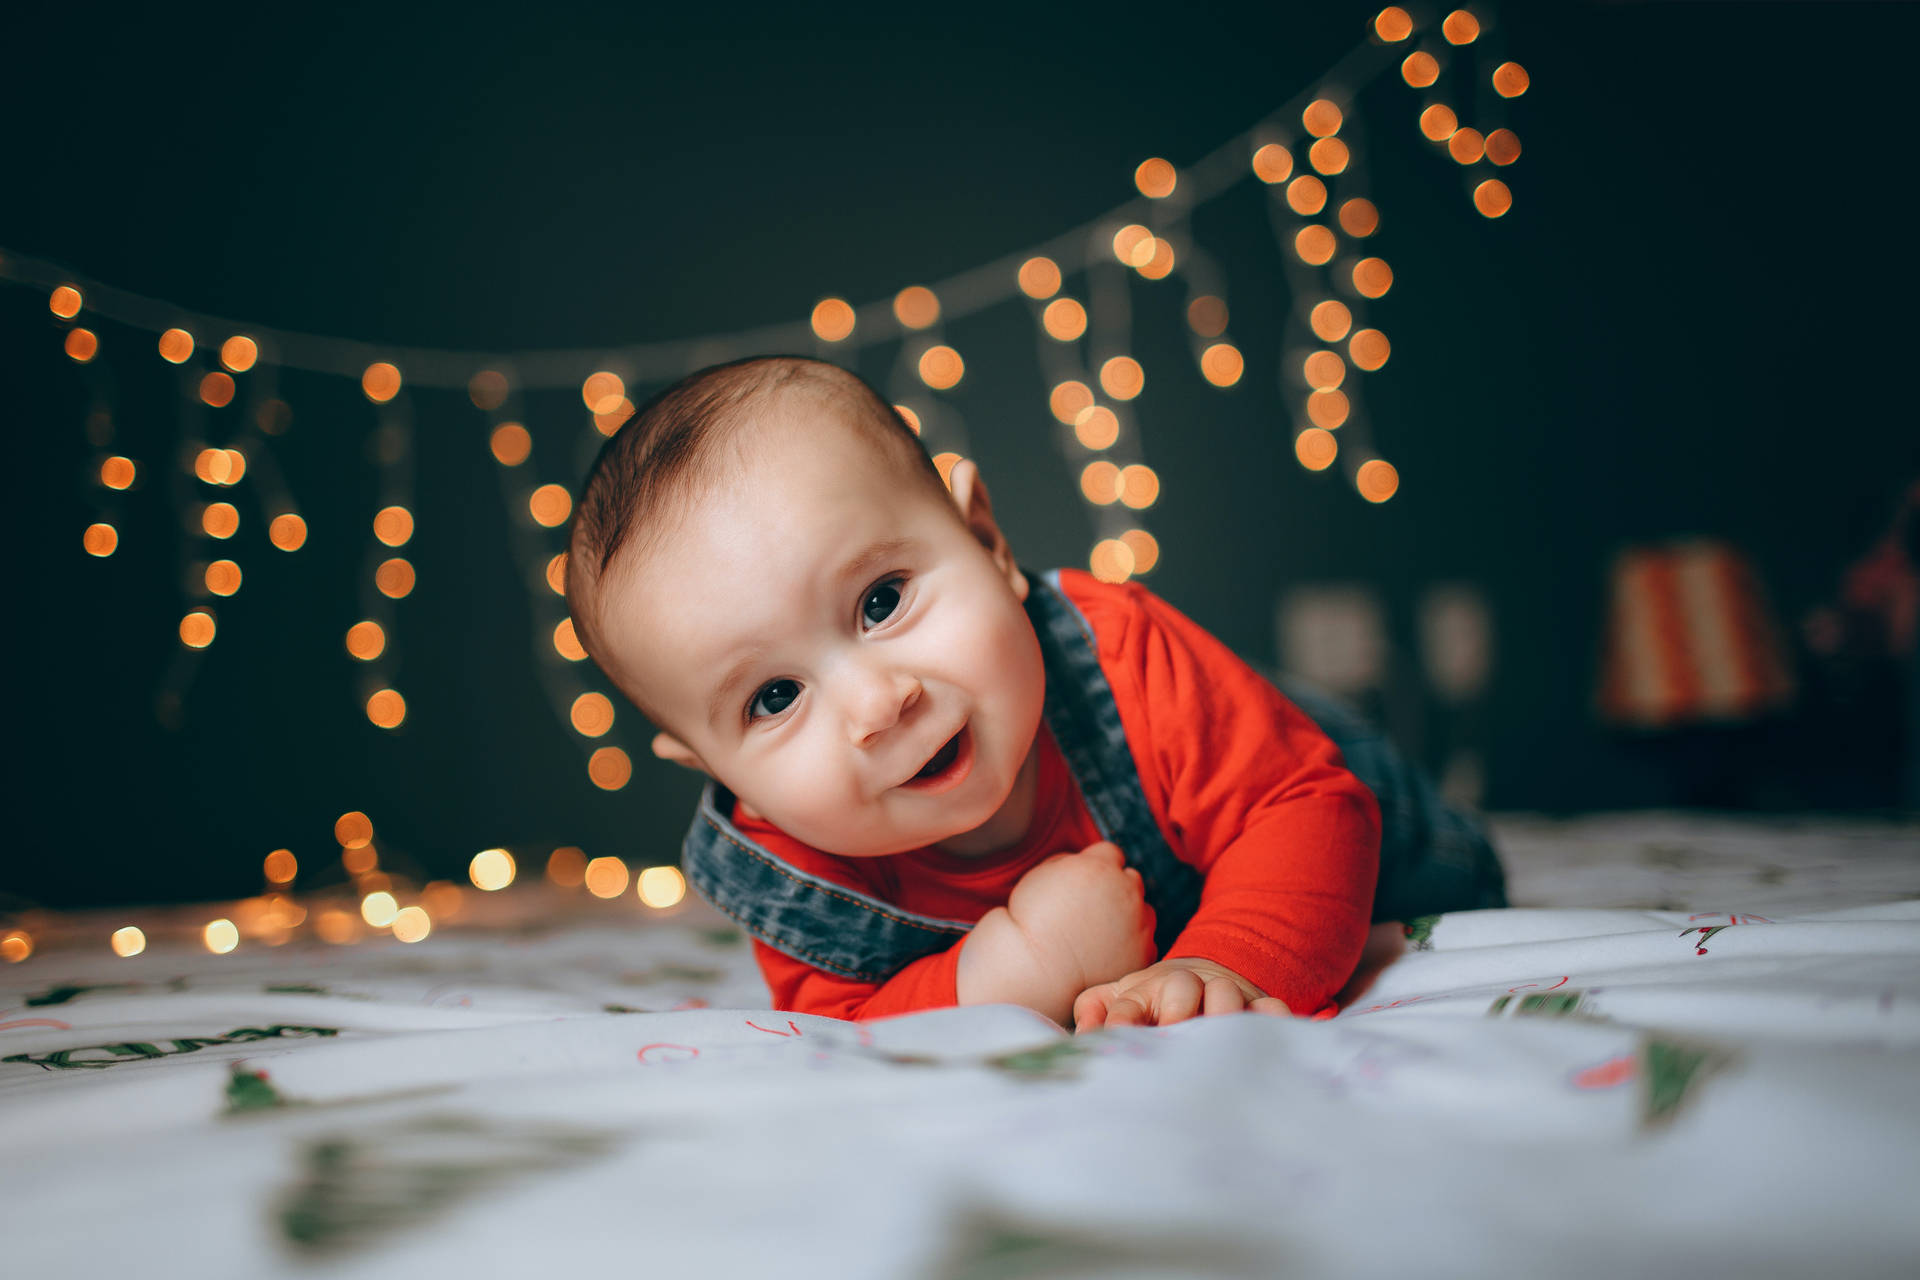 Very Cute Baby With Christmas Lights Wallpaper